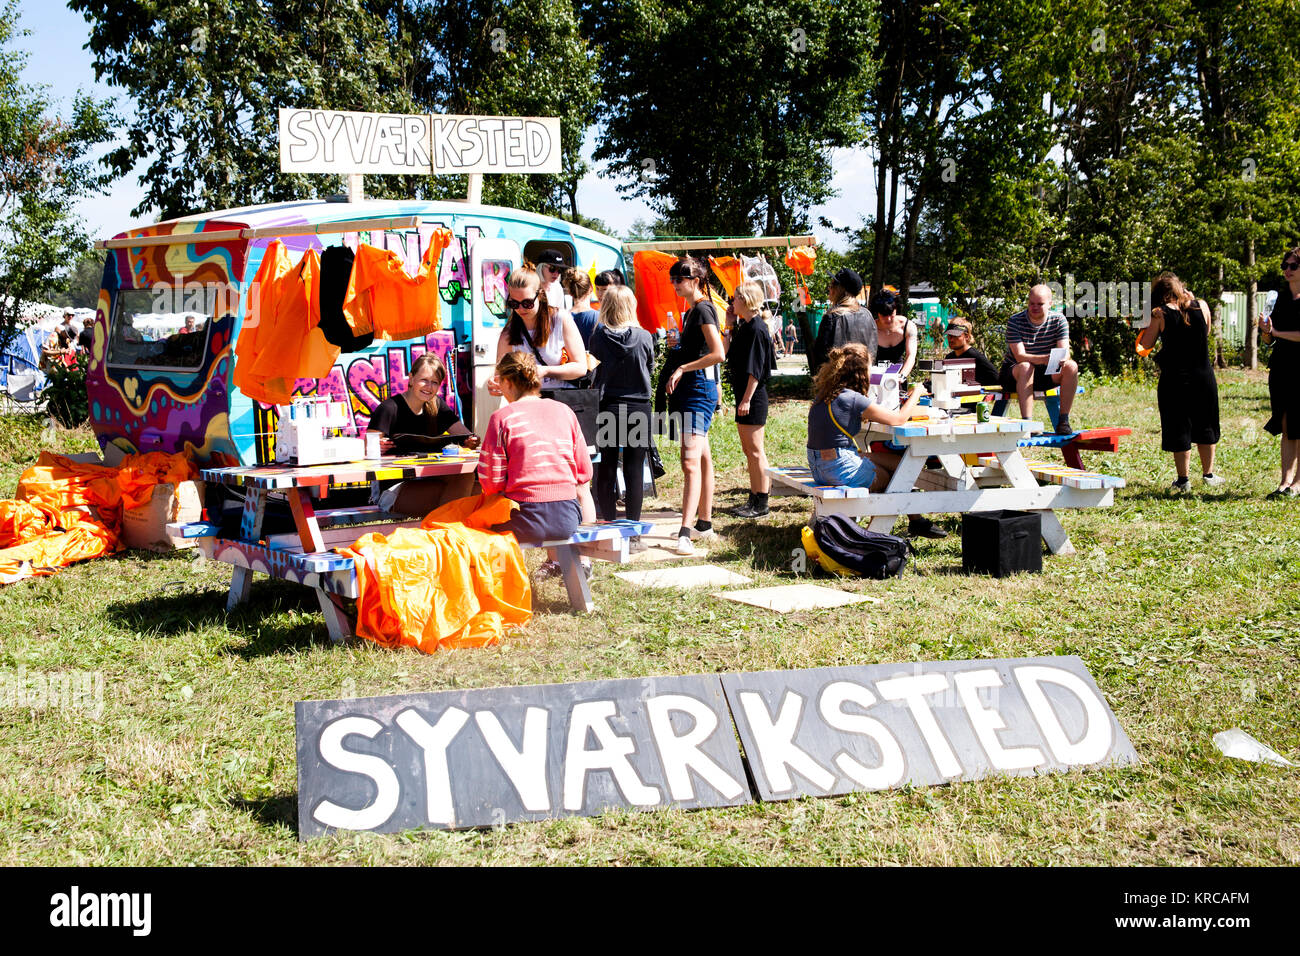 At the Roskilde Festival camping area lots of activities are going on like here where some festival guest have set up a sewing workshop for those interested. Denmark 30/06 2014. Stock Photo